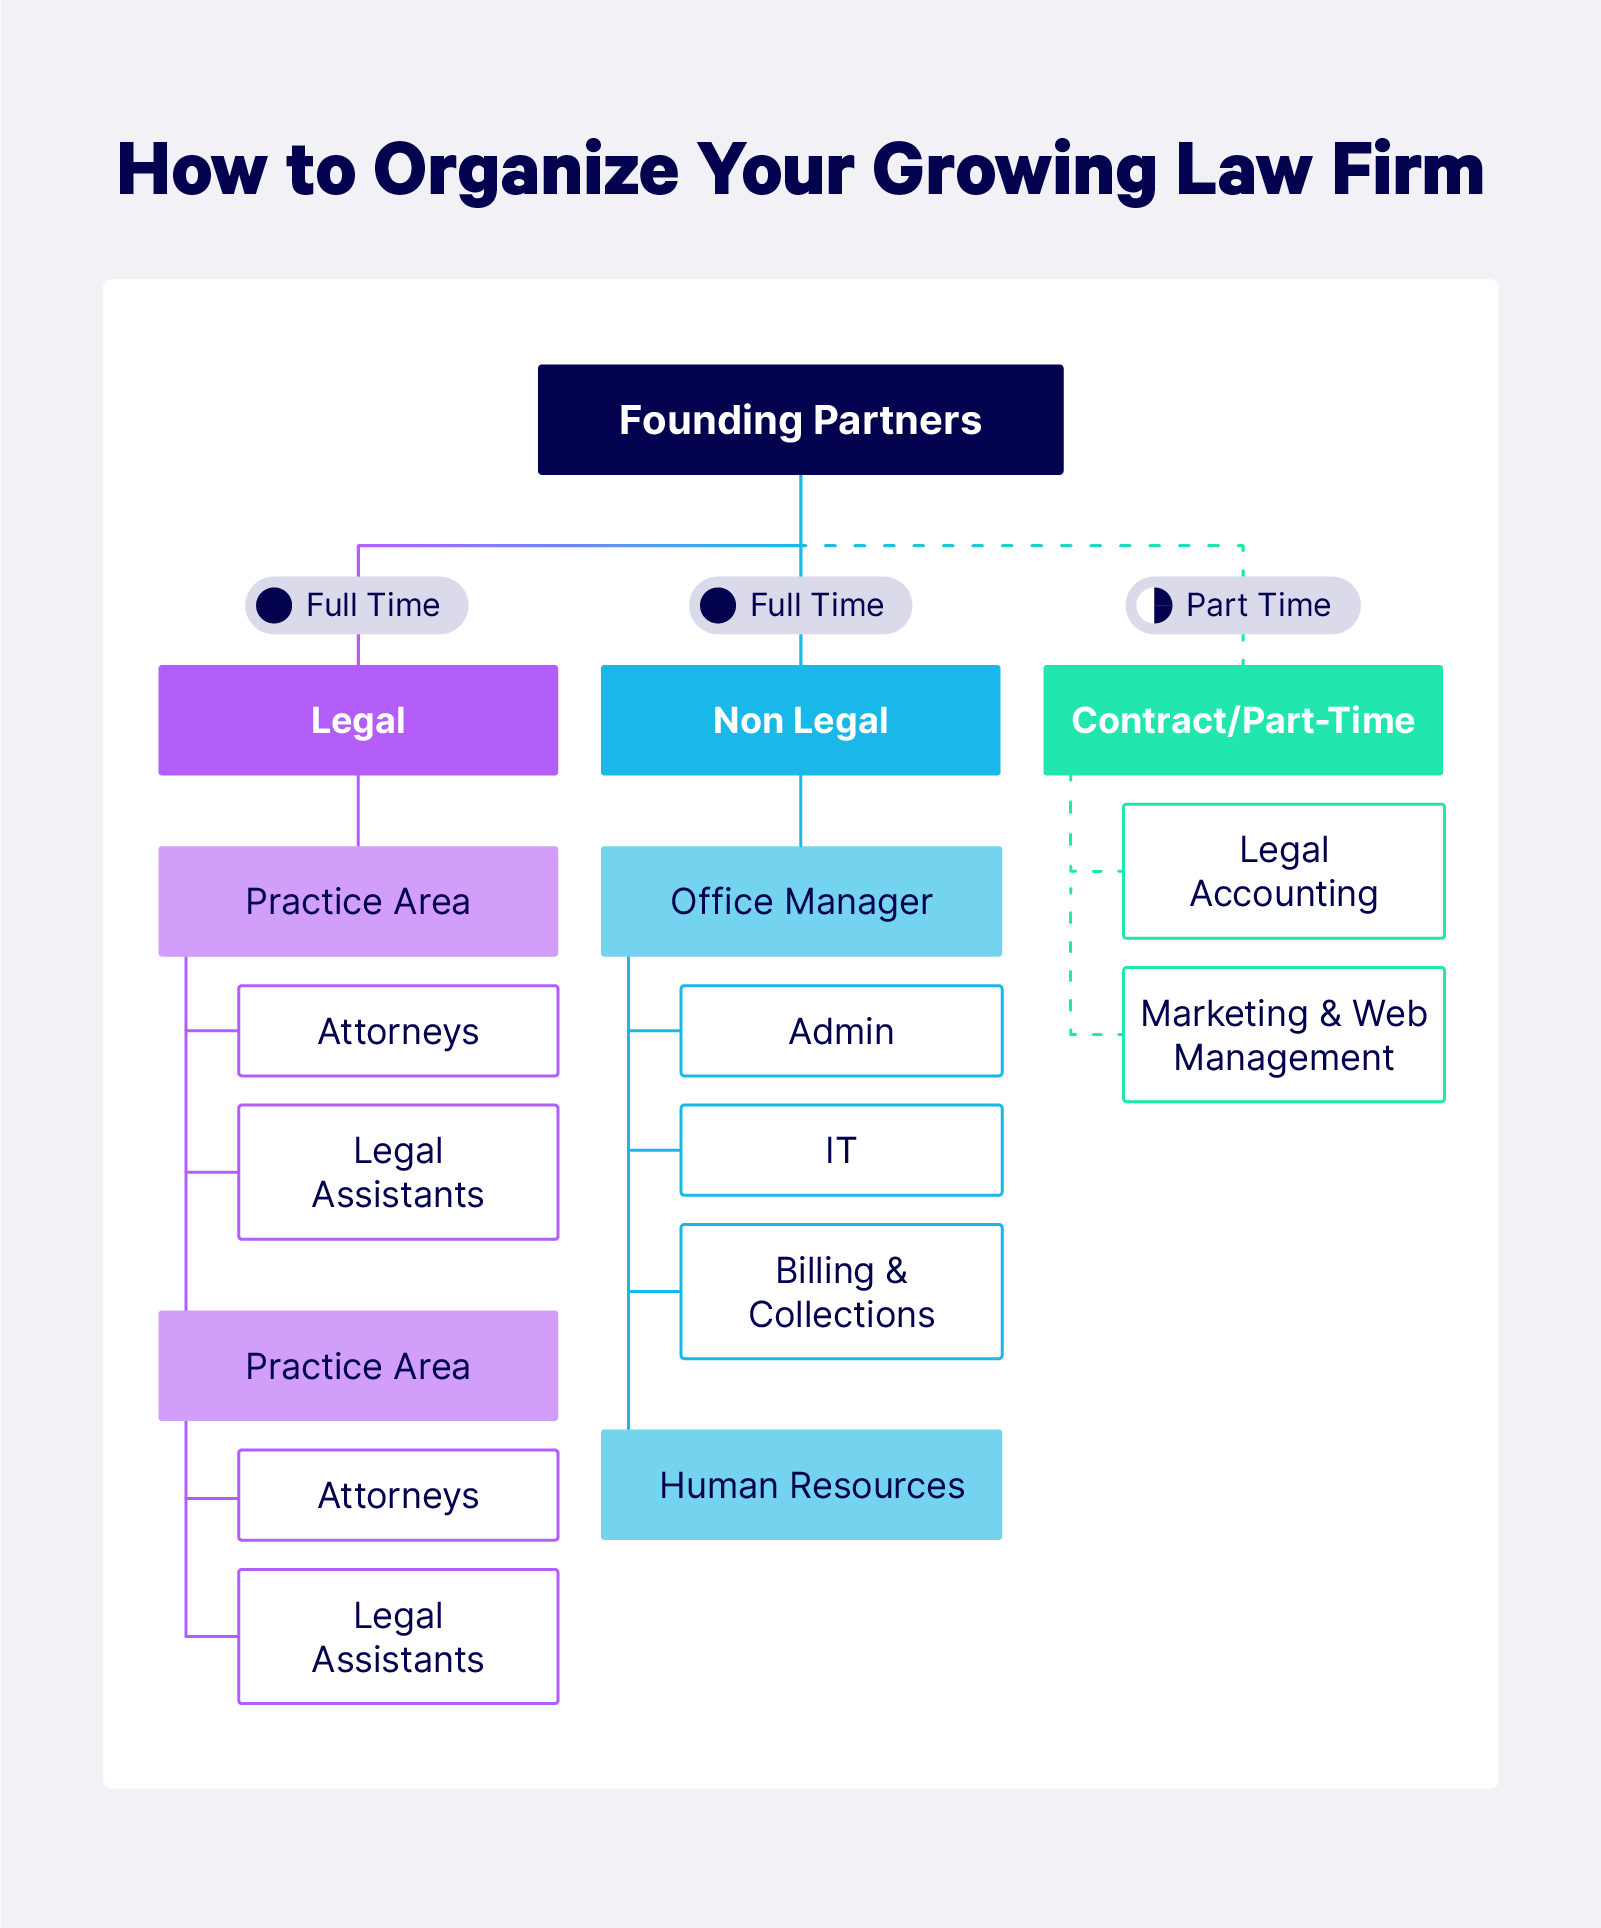 Law firm organizational chart to understand how to grow a law firm